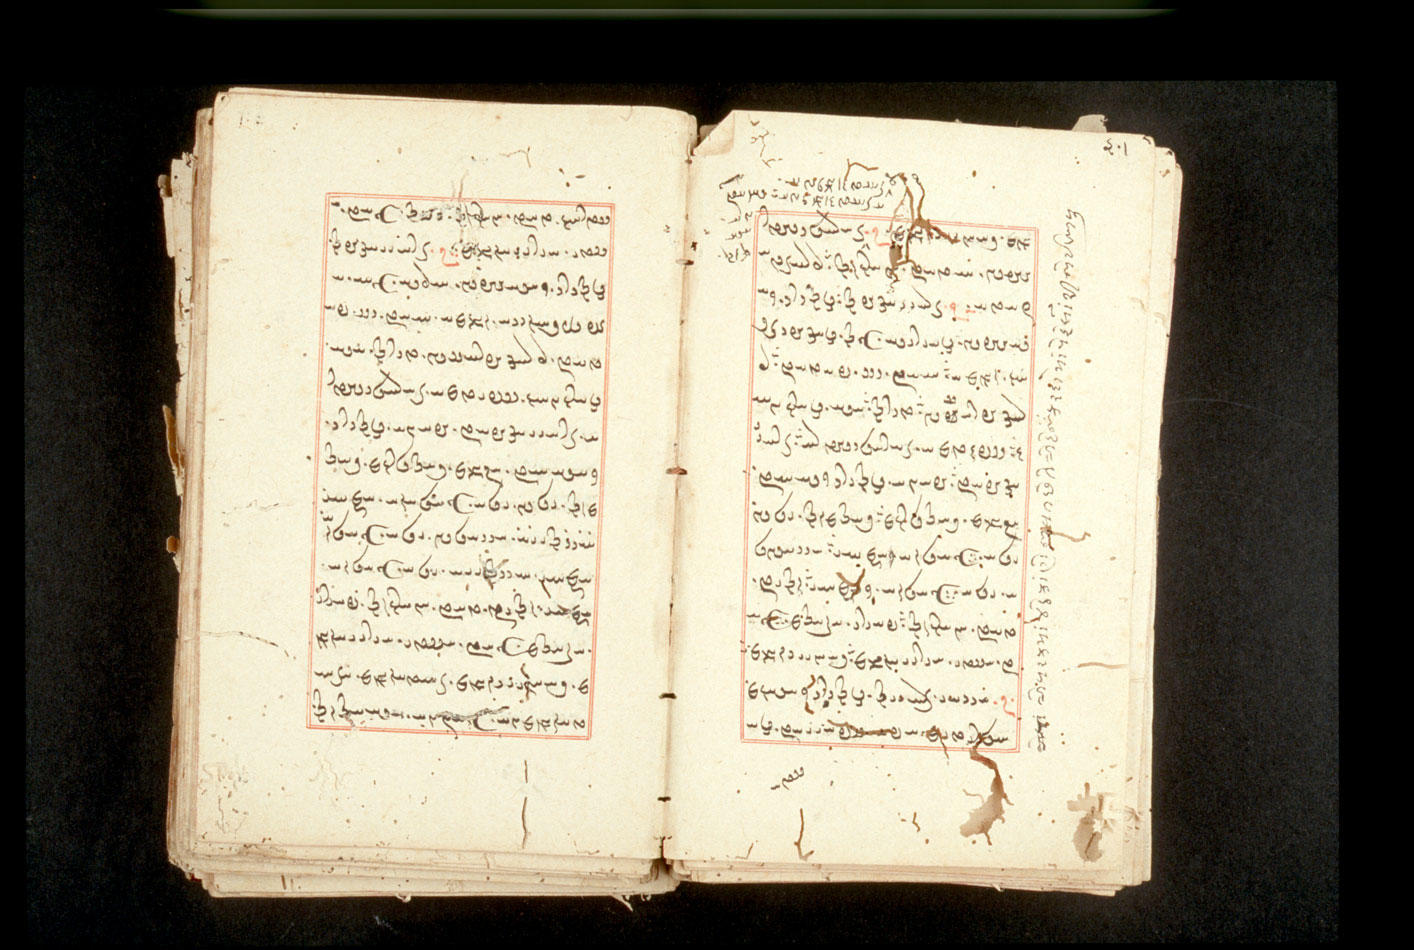 Folios 401v (right) and 402r (left)